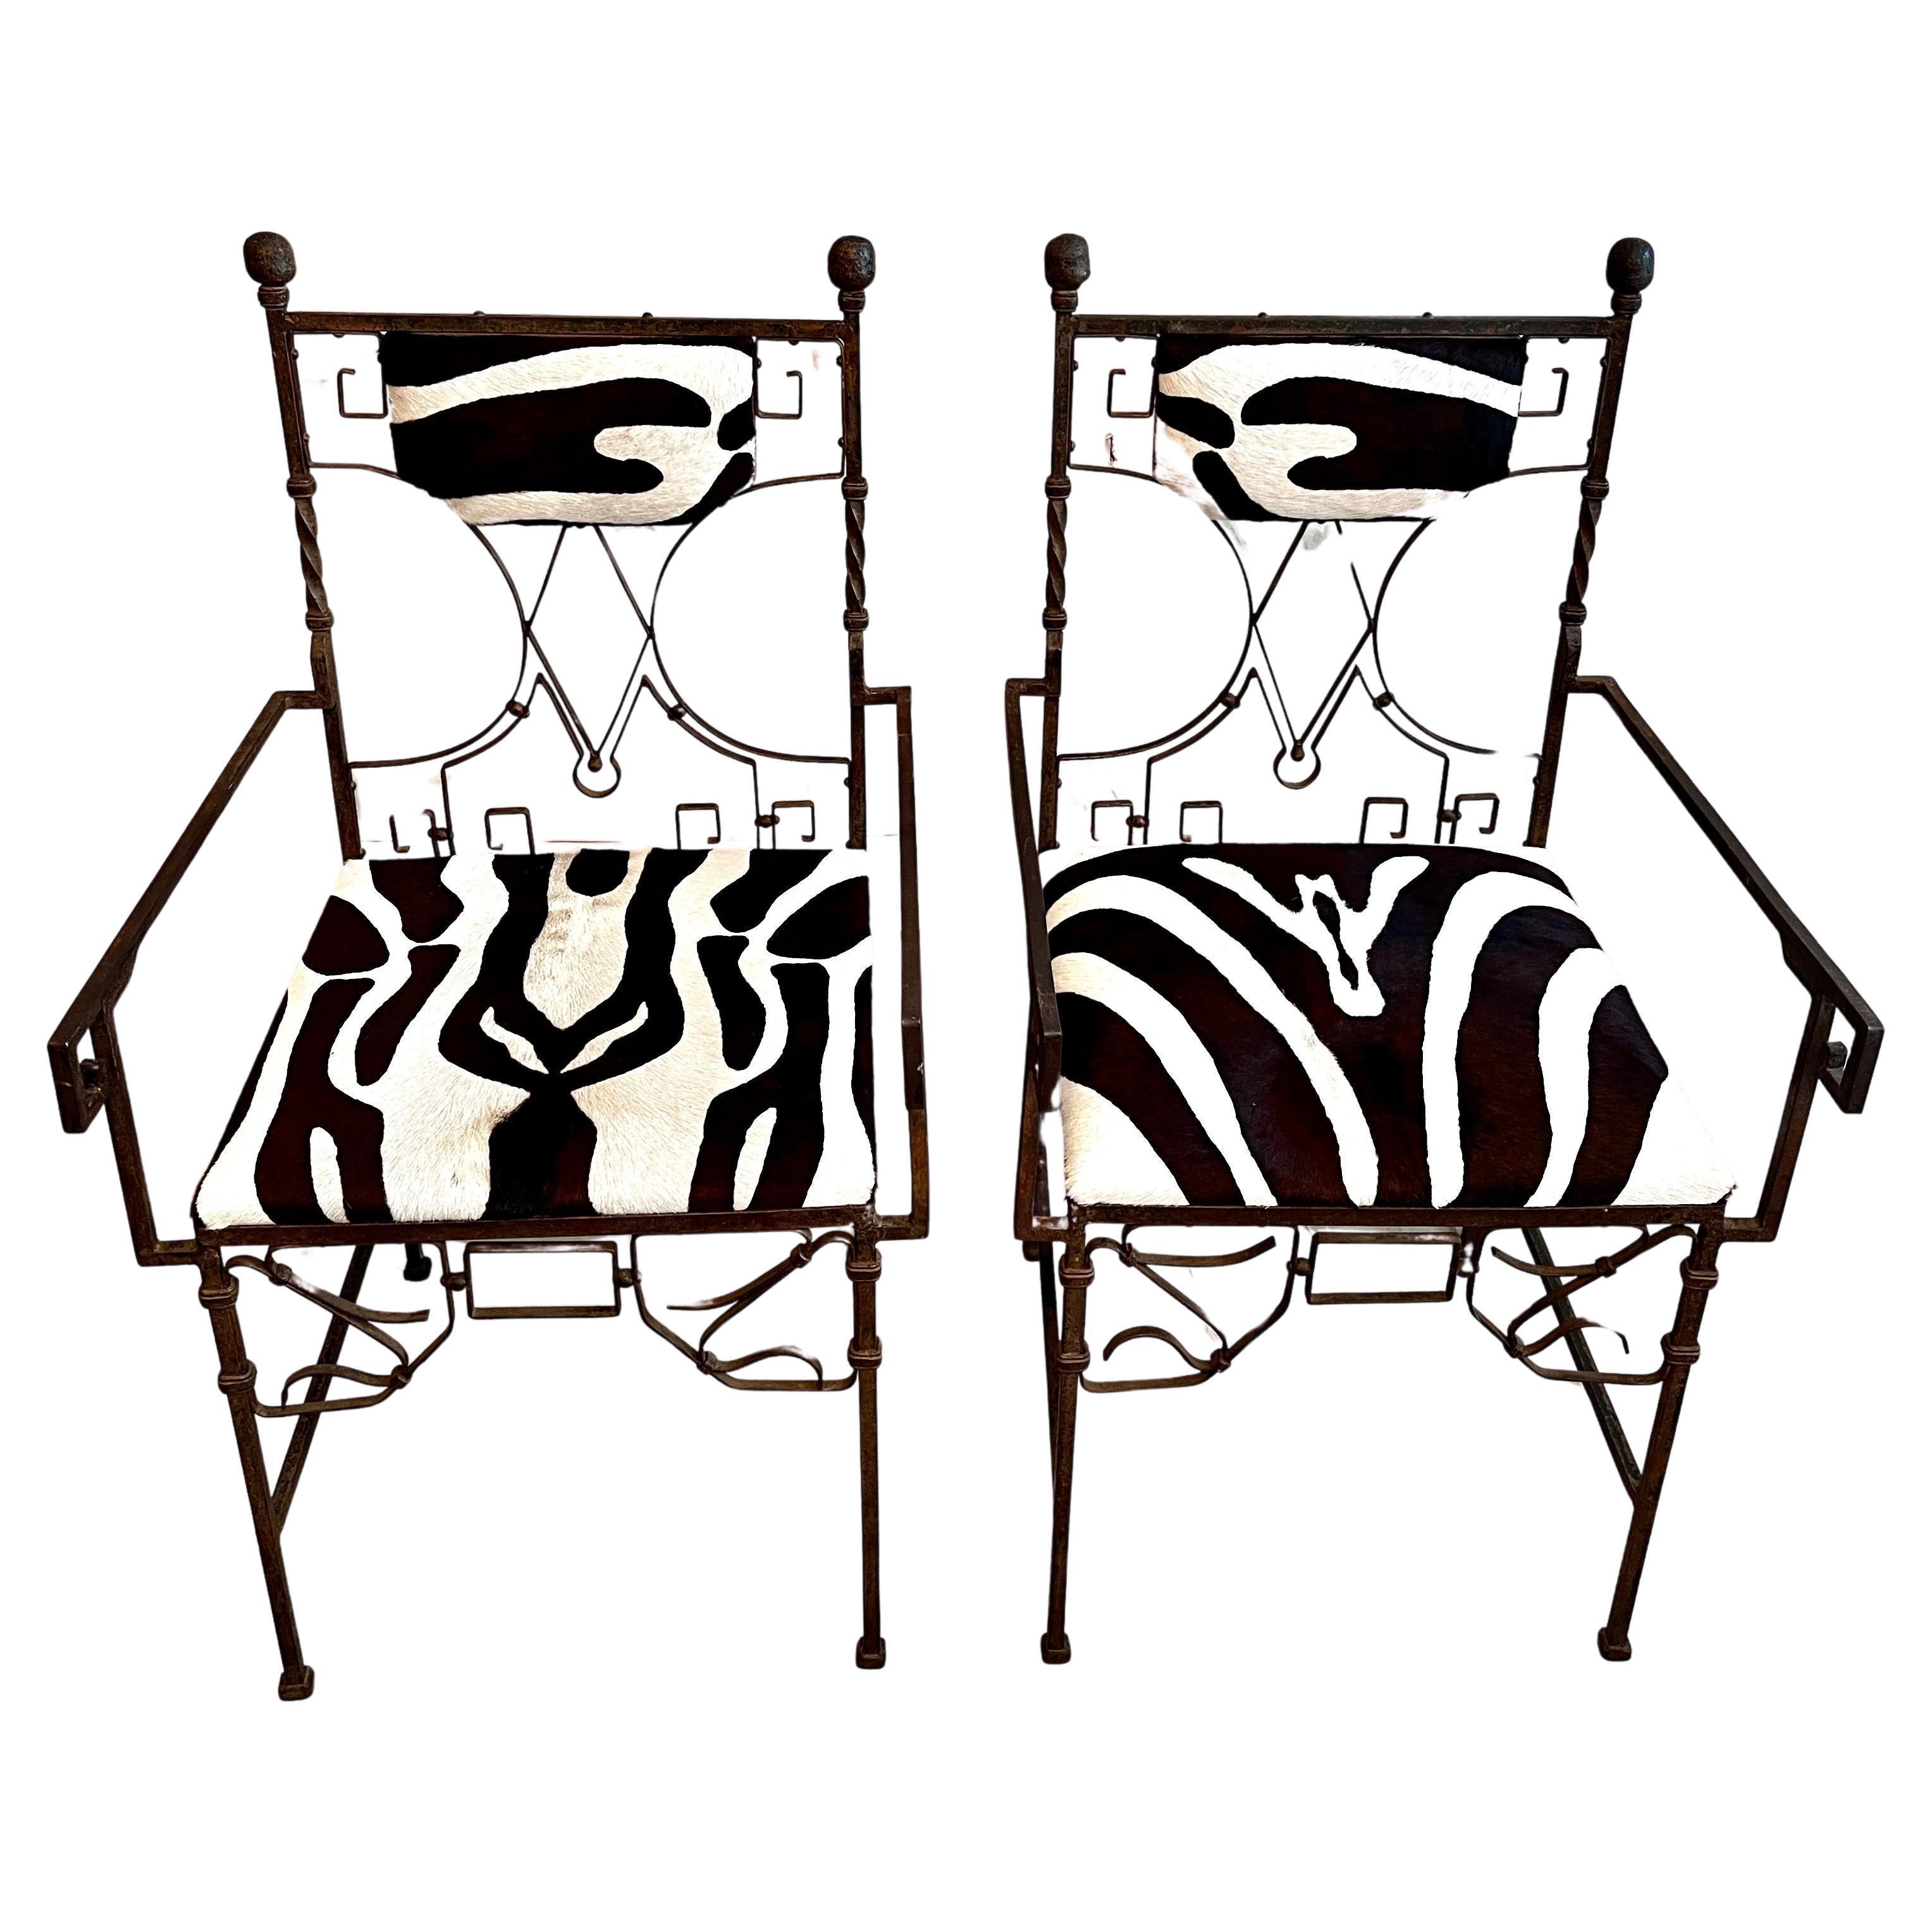 Pair of Wrought Iron French Art Deco Chairs with Zebra Print